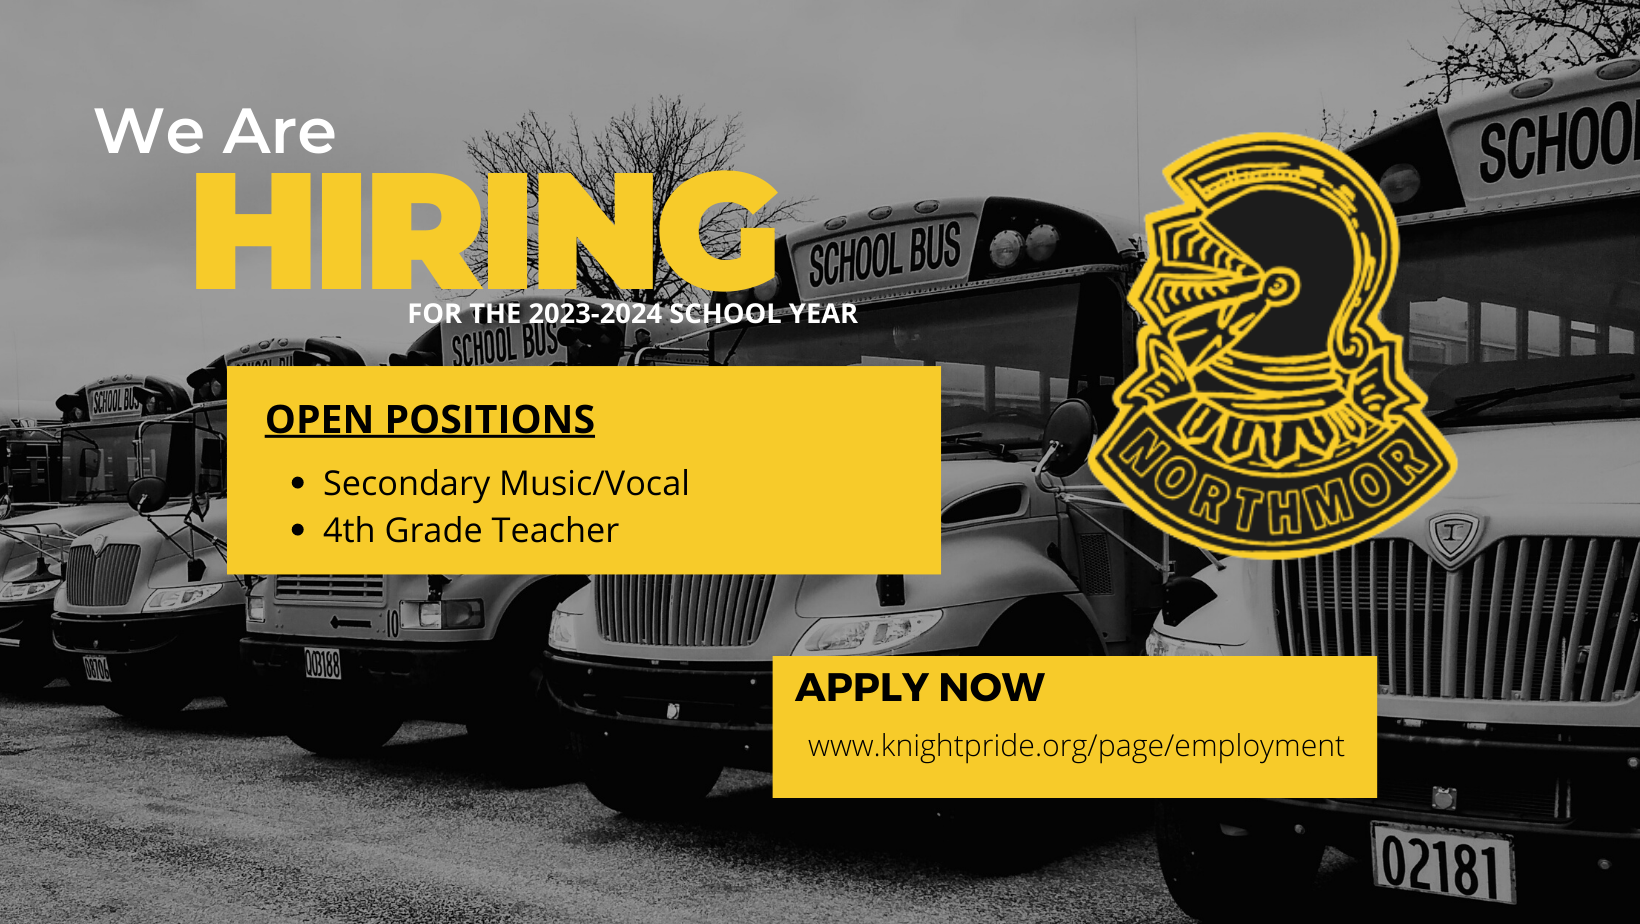 we are hiring for the 2023-2024 school year open positions secondary music/vocal 4th grade teacher Apply today! https://www.knightpride.org/page/employment Northmor logo in black and gold on black and white photo background of school buses